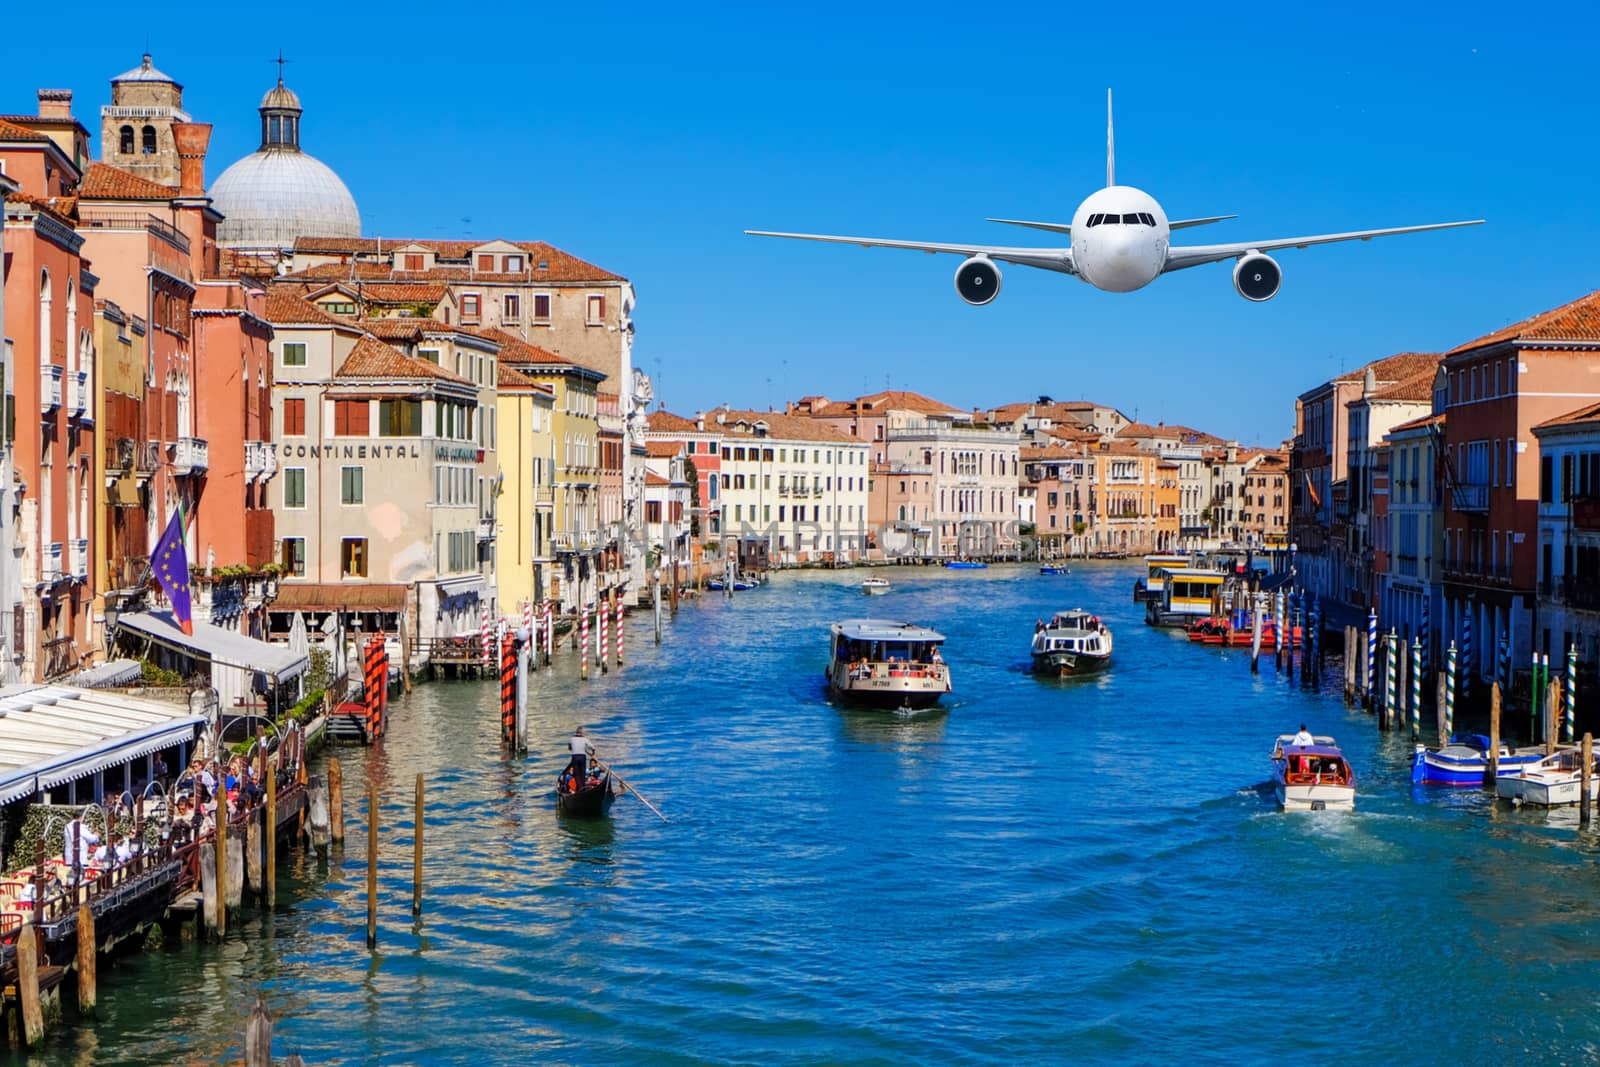 Front of real plane aircraft, on Venice grand canal in Sunrise a by Surasak